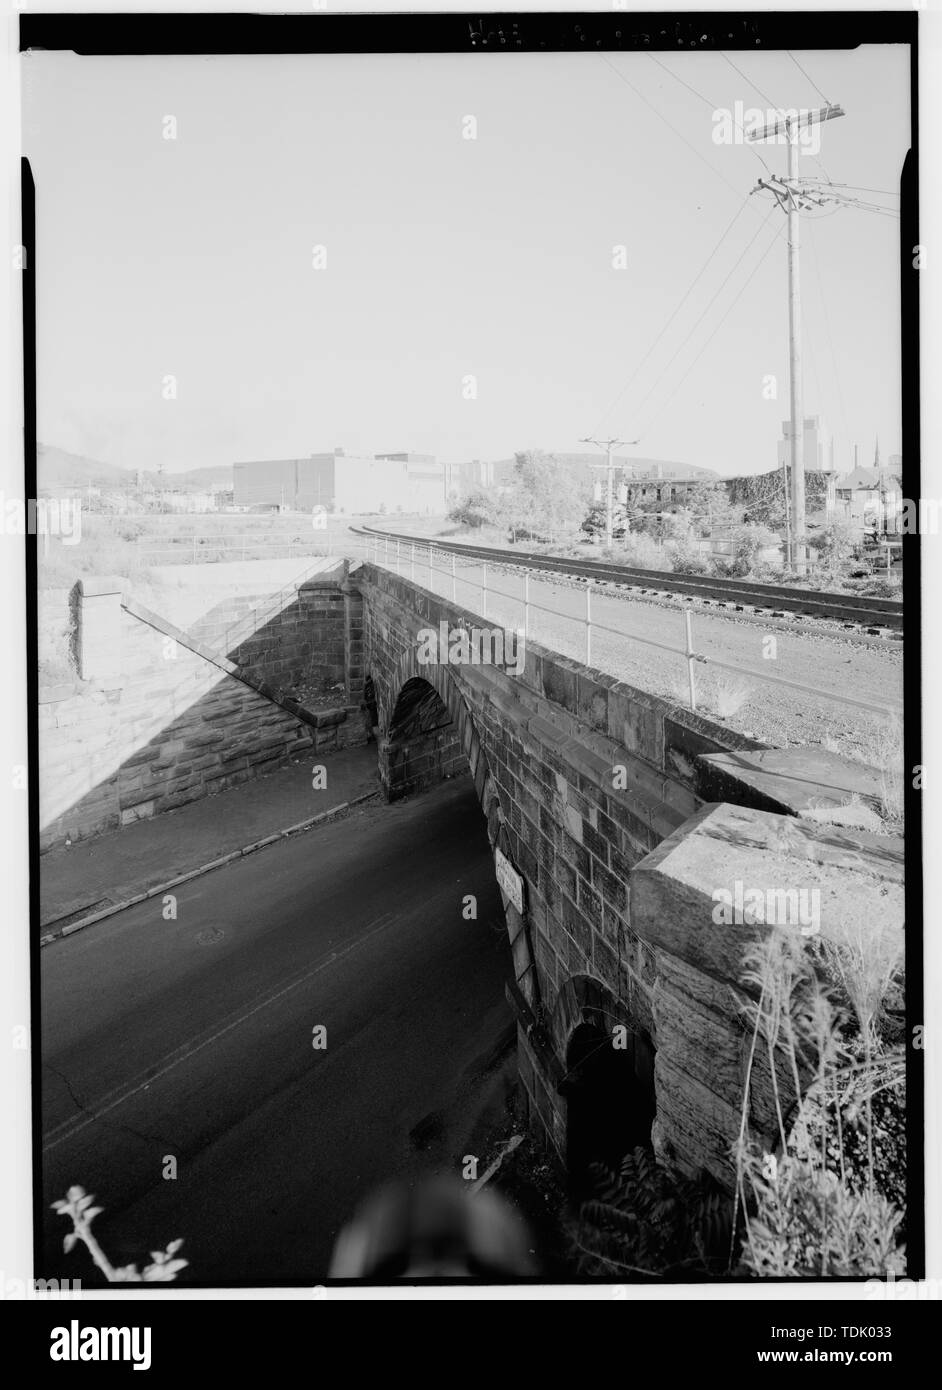 OBLIQUE VIEW AT TRACK LEVEL, SHOWING NORTH FACE OF BRIDGE, LOOKING EAST. - Philadelphia and Reading Railroad, Skew Arch Bridge, North Sixth Street at Woodward Street, Reading, Berks County, PA; Osborne, Richard B; Philadelphia and Reading Railroad; Consolidated Rail Corporation; Norfolk Southern Railroad; Lebanon Valley Railroad; DeLony, Eric N, project manager; Pennsylvania Historical and Museum Commission, sponsor; Consolidated Rail Corporation (Conrail), sponsor; Spivey, Justin M, historian; Barrett, William Edmund, photographer; Lowe, Jet, photographer Stock Photo